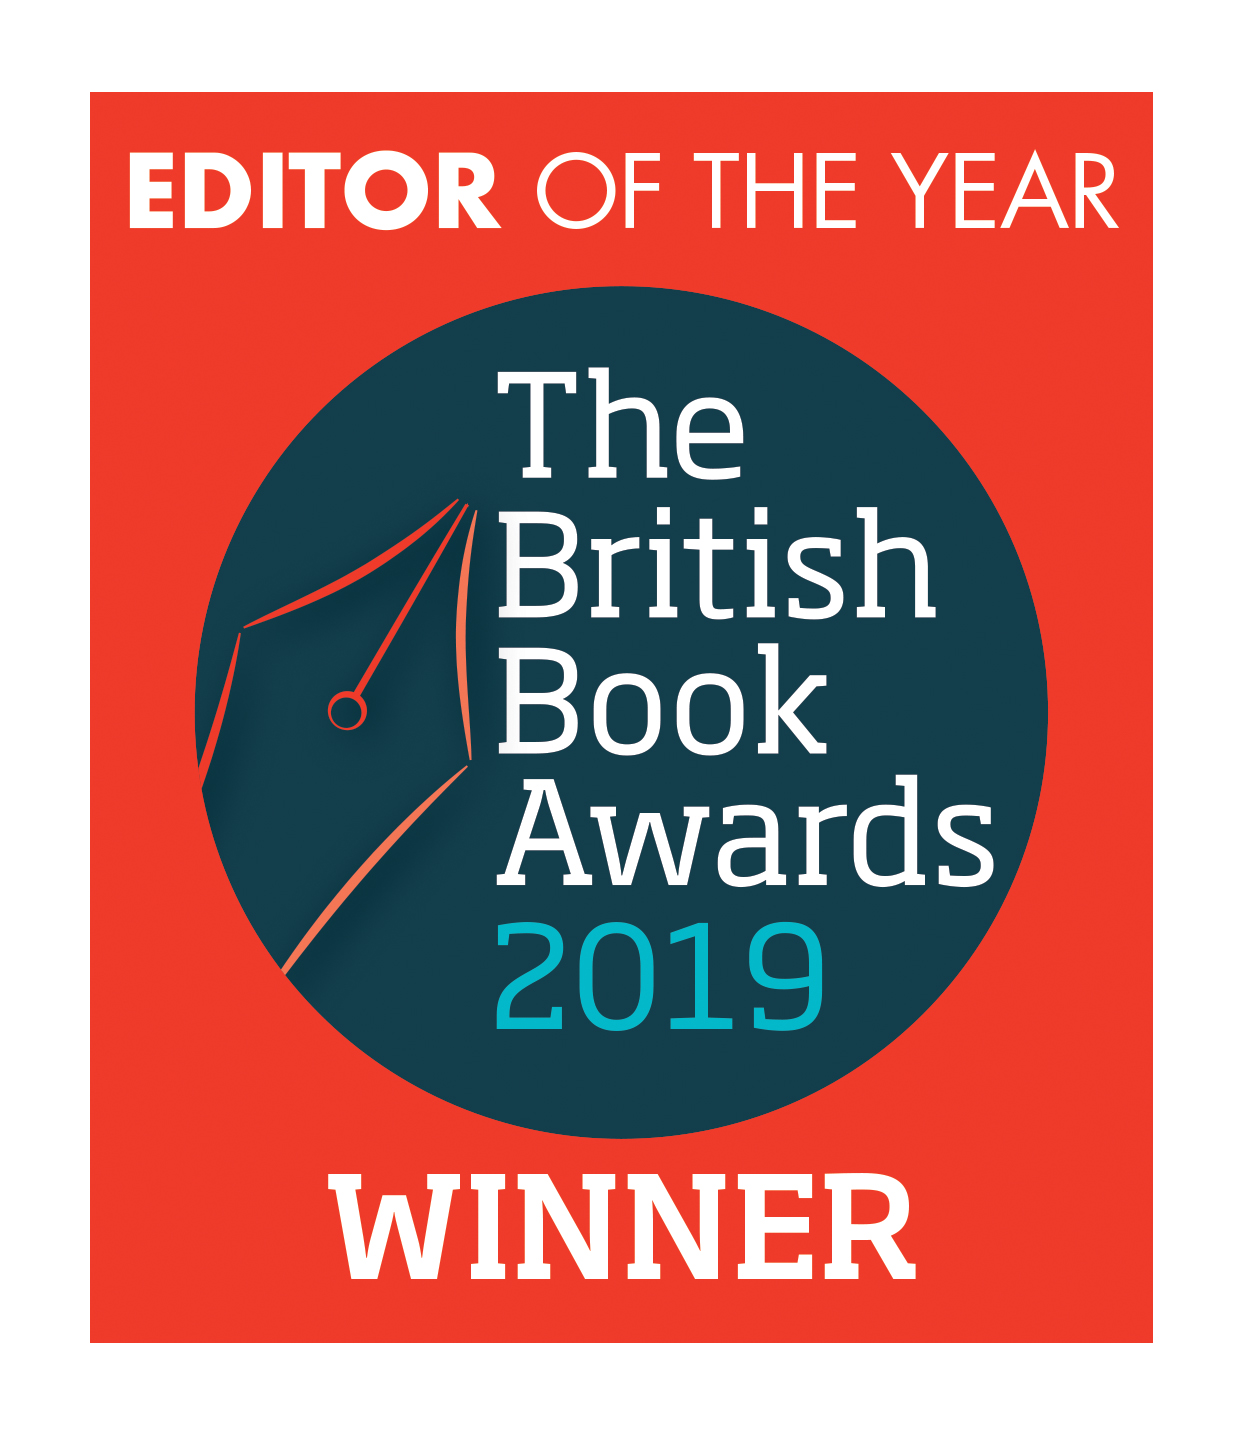 Editor of the Year - The British Book Awards 2019